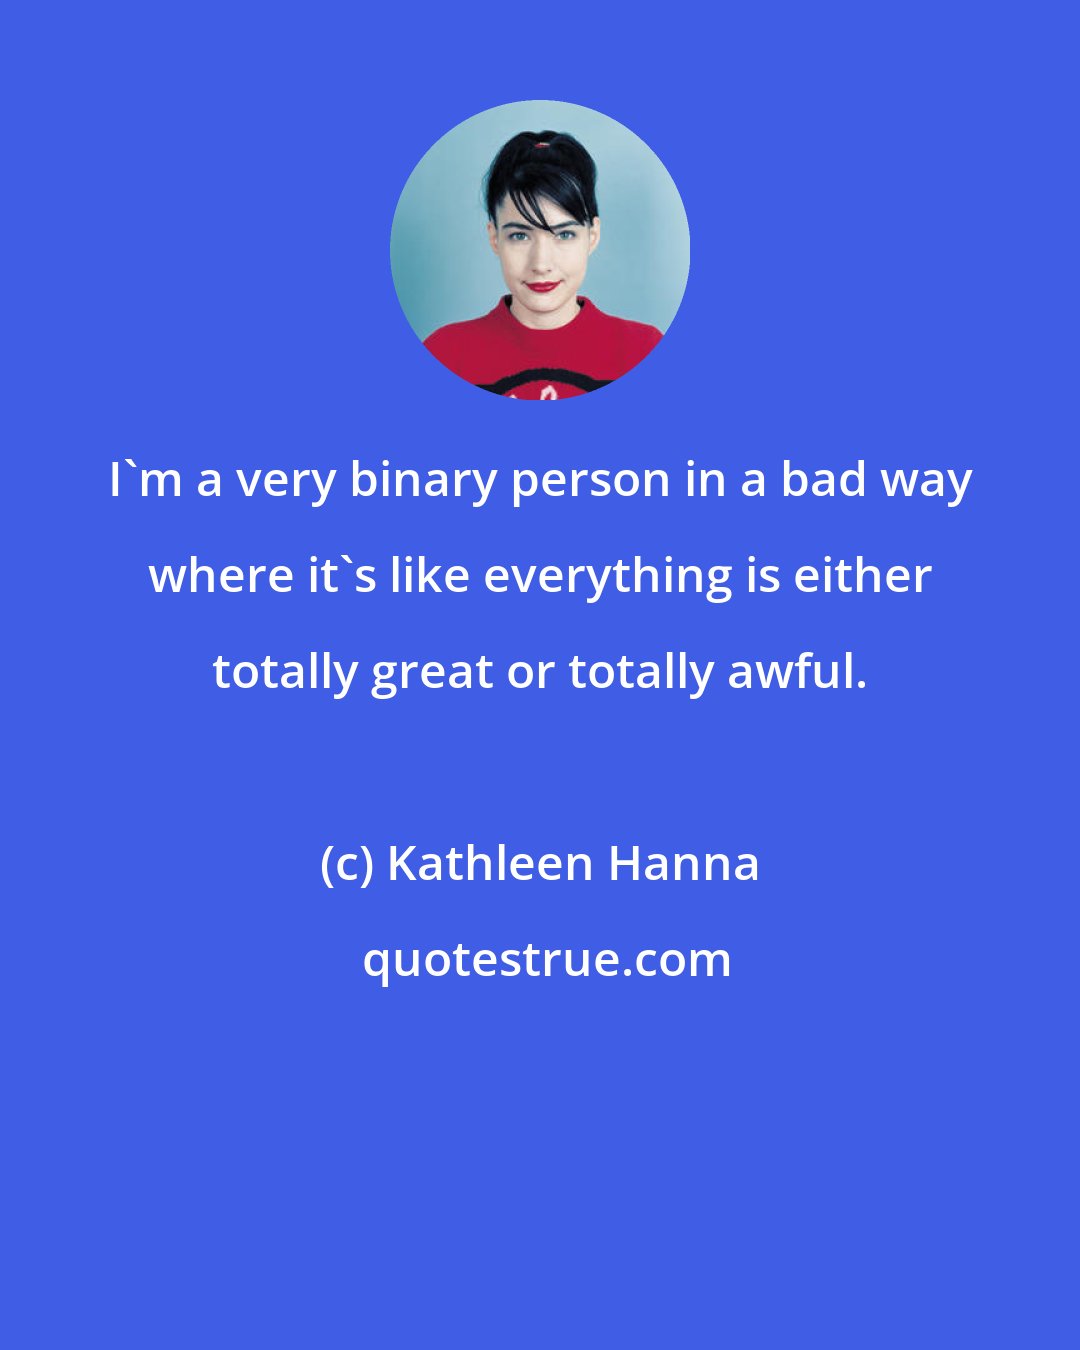 Kathleen Hanna: I'm a very binary person in a bad way where it's like everything is either totally great or totally awful.